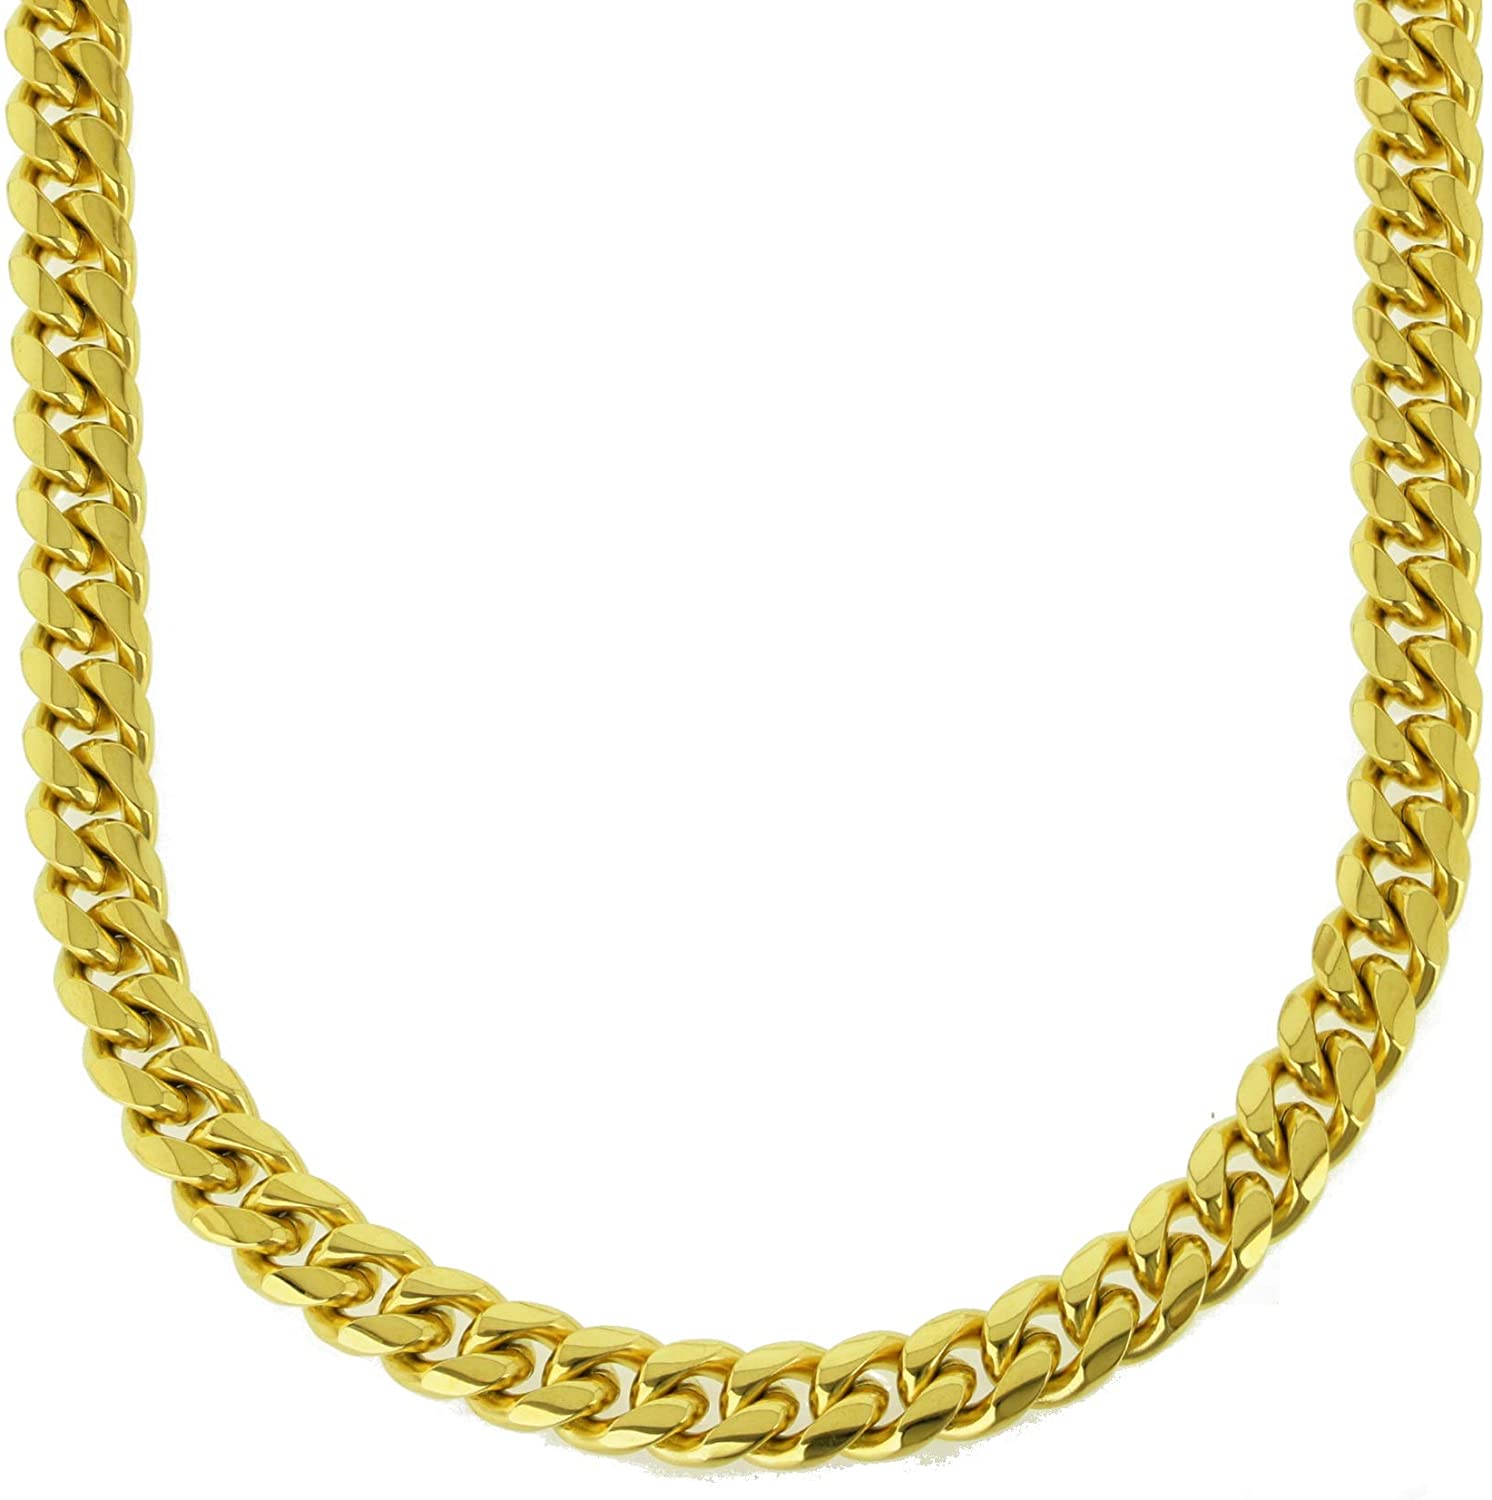 Mens 14k gold Thick Miami Cuban Link Choker necklace chain Gold Finish 6 mm  20